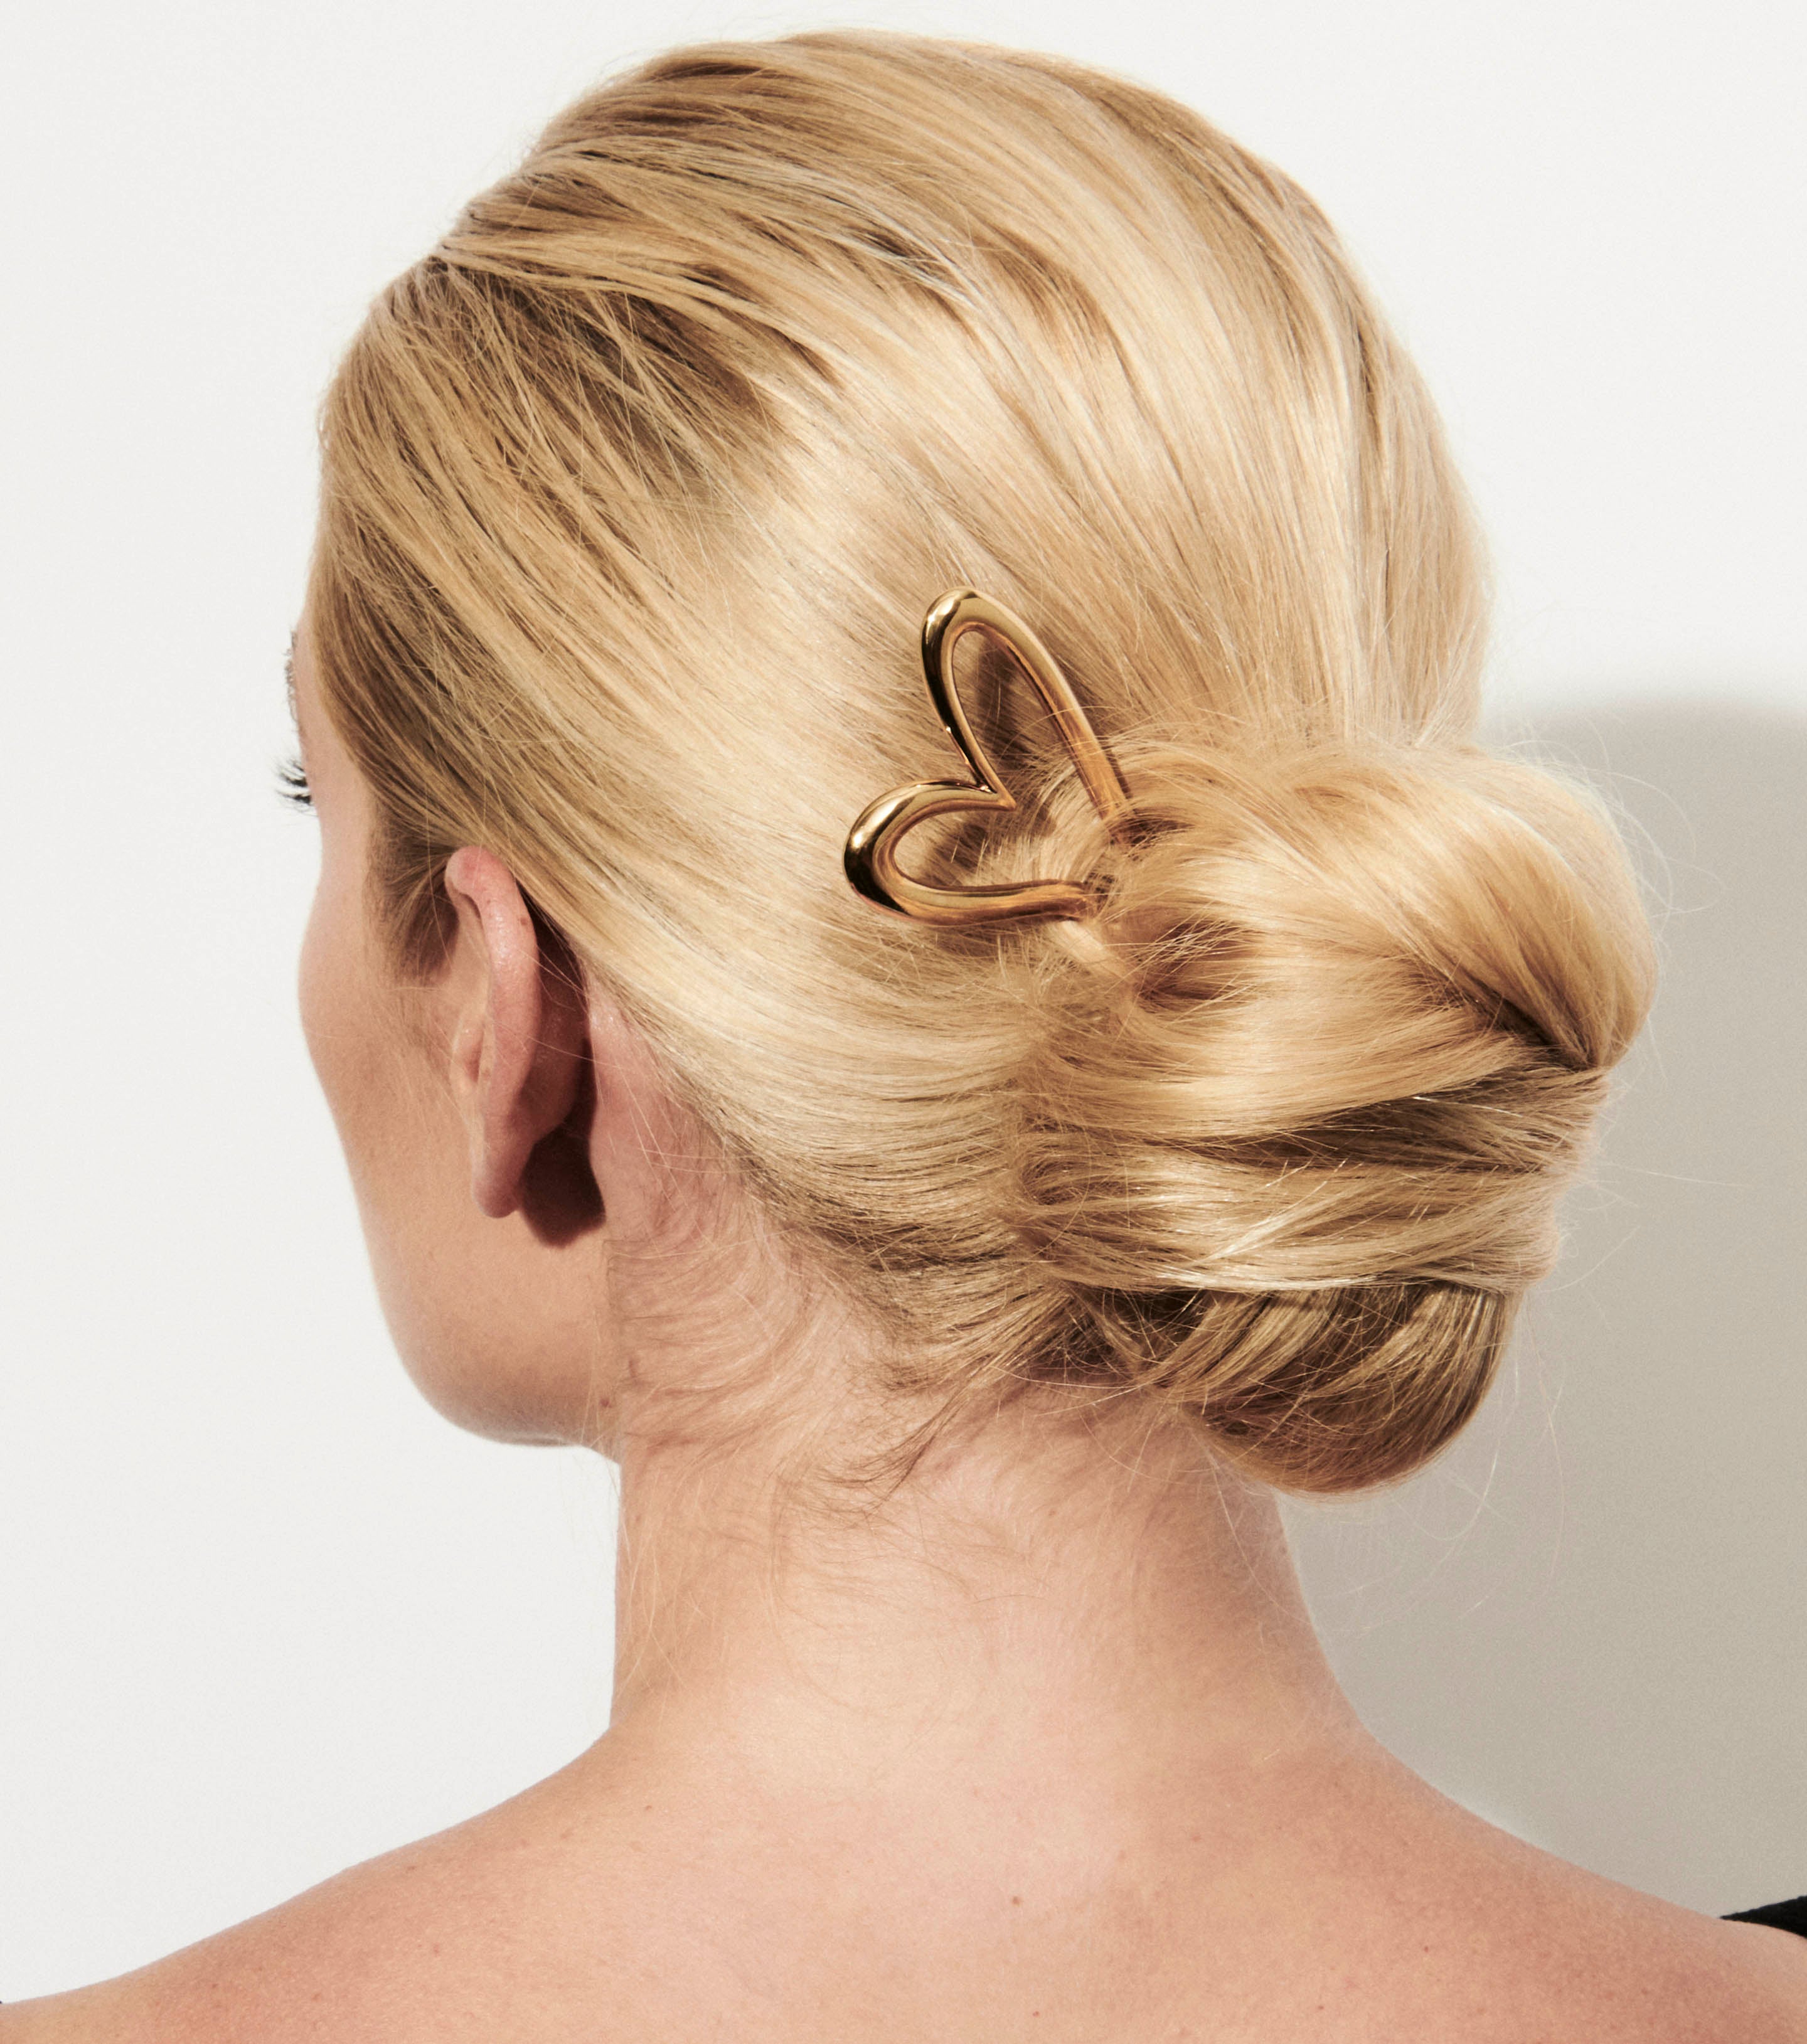 Trend alert! Exposed bobby pin hairstyles you have to try RN